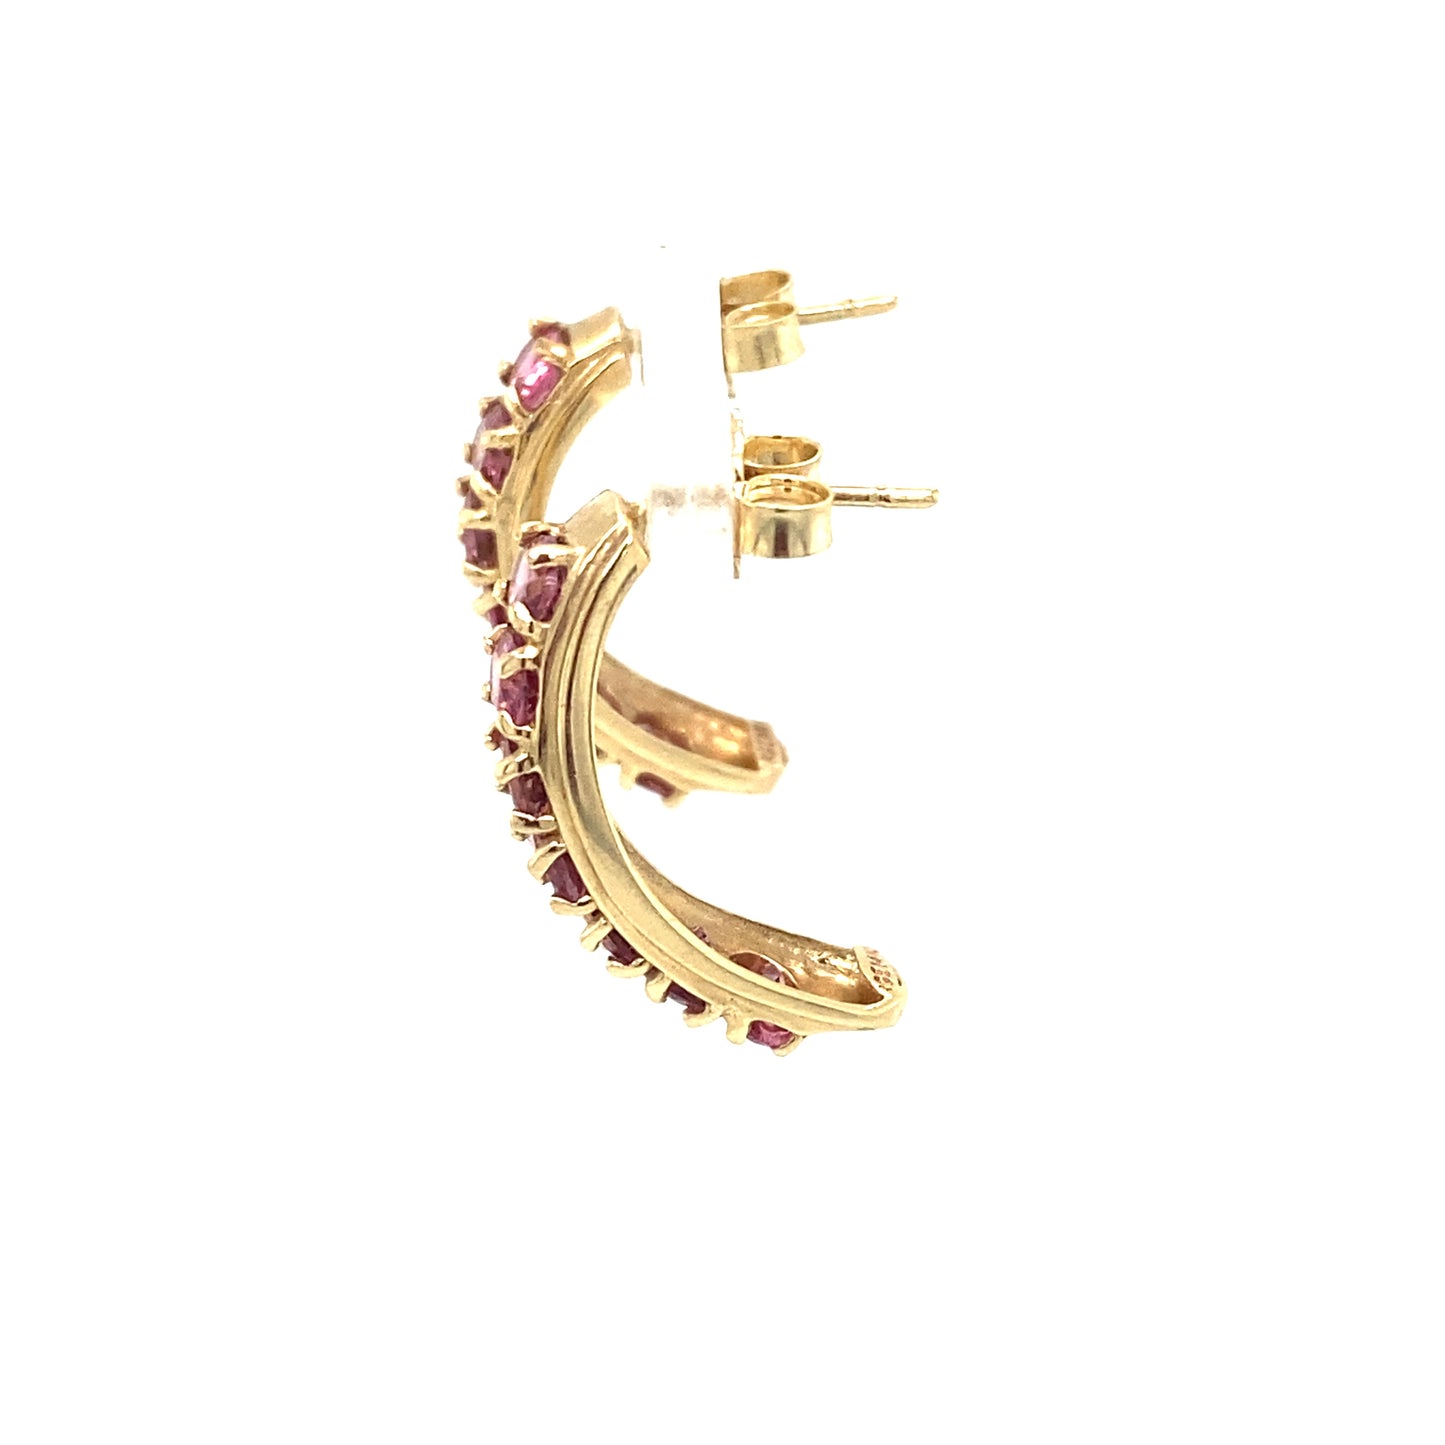 Circa 1990s 2.0ctw Pink Tourmaline Curved Earrings in 14K Gold